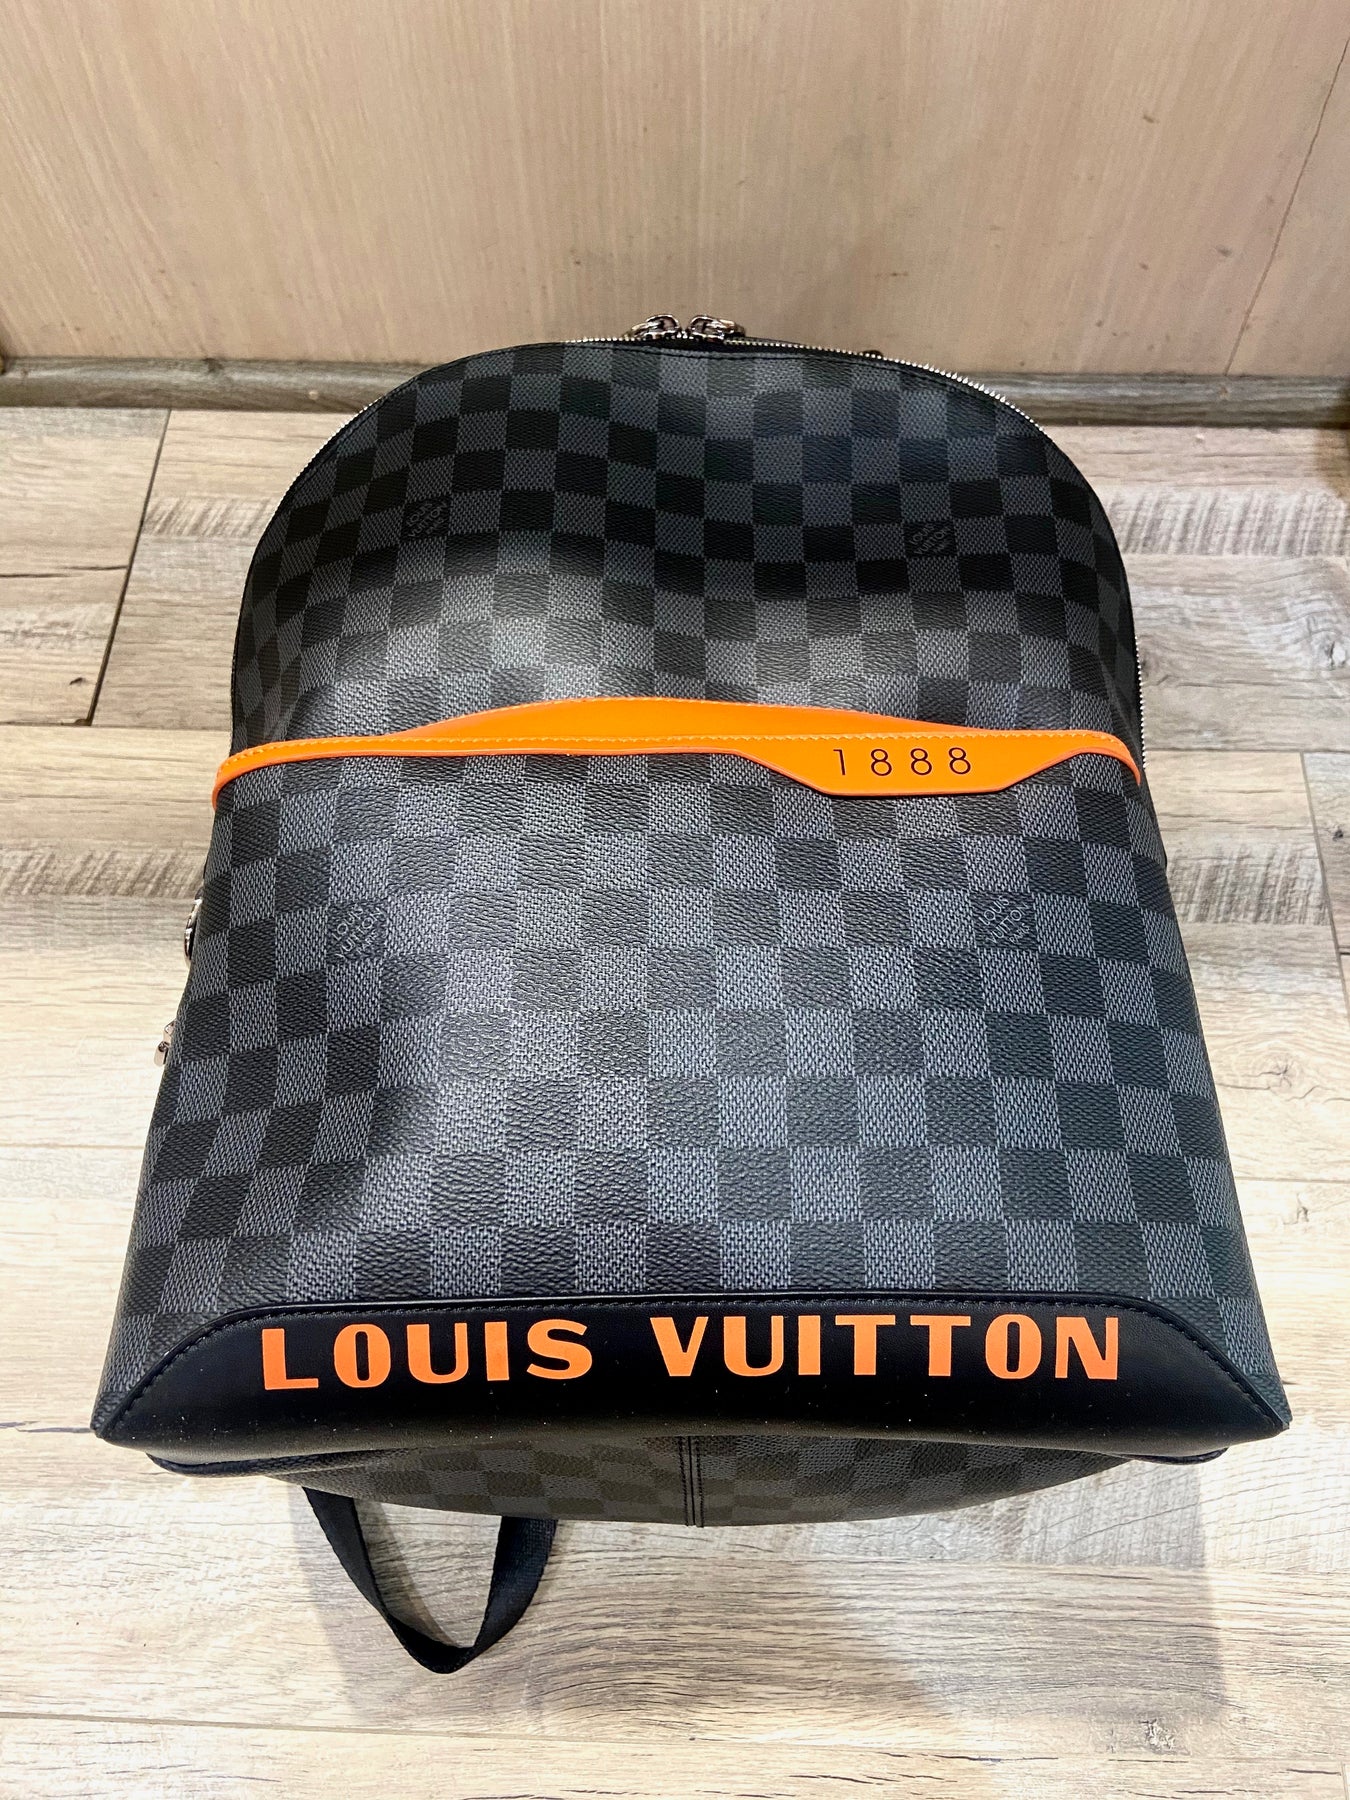 LOUIS VUITTON DAMIER COBALT RACE DISCOVERY BACKPACK PM